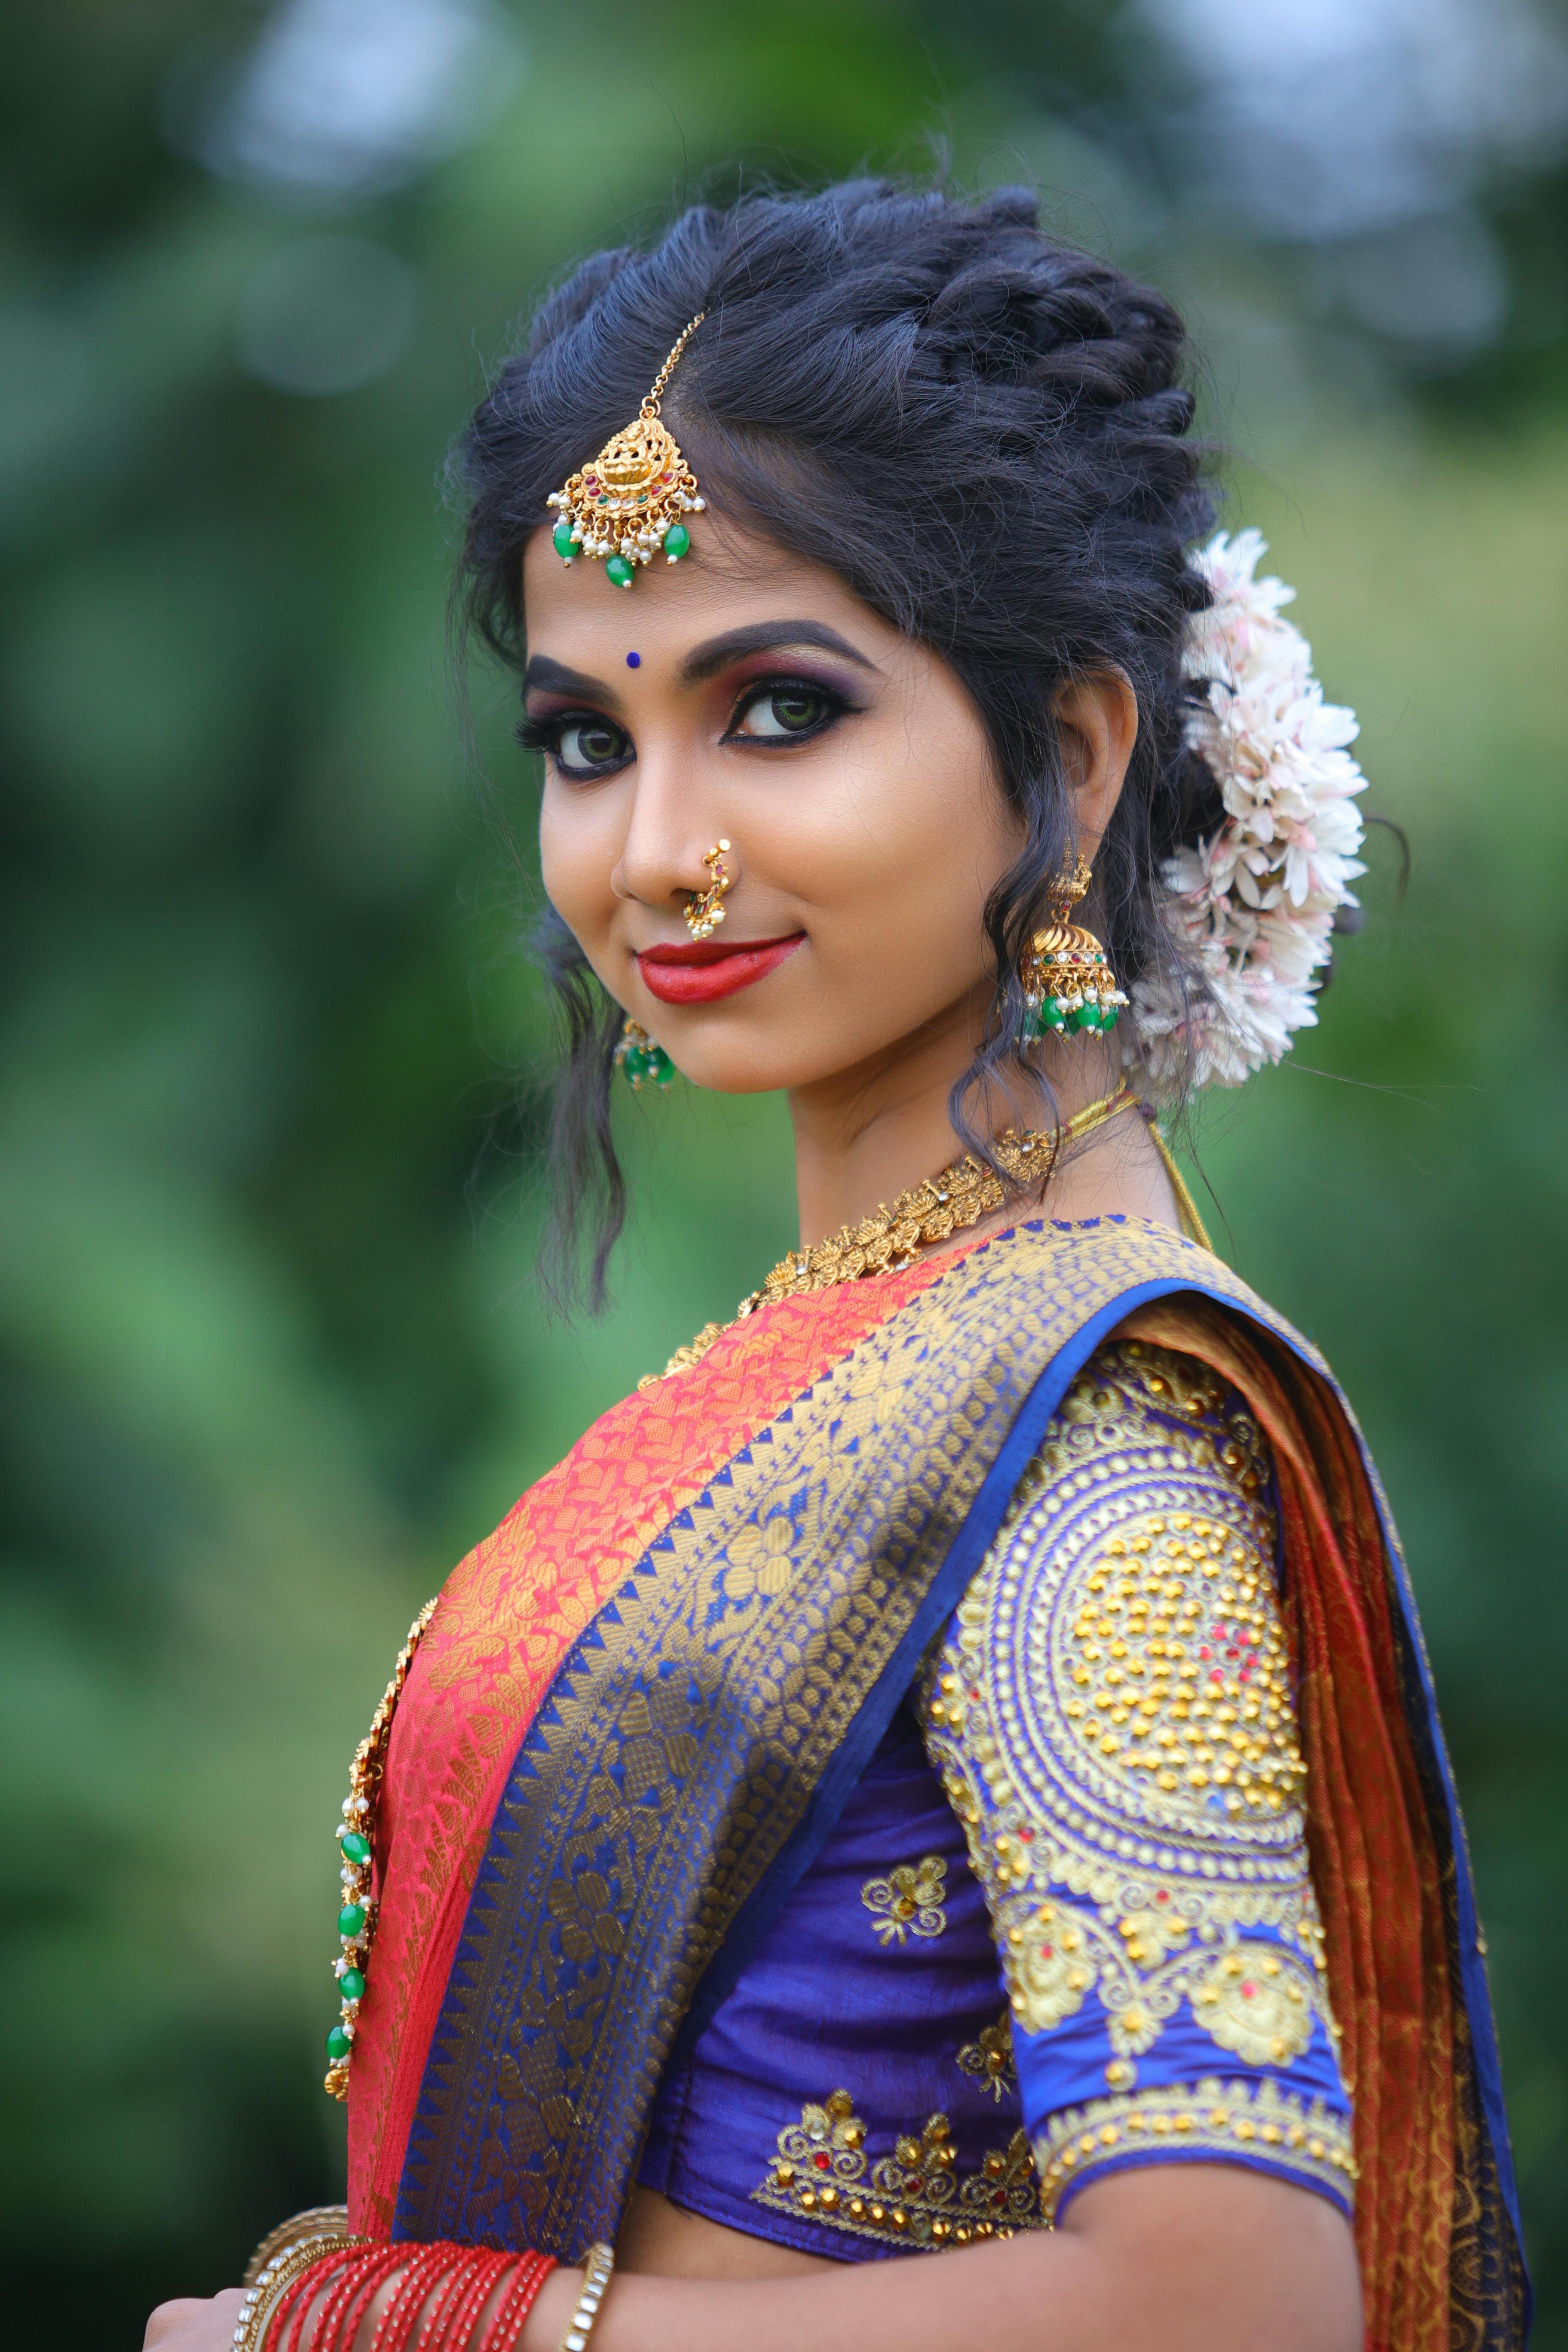 Want The Marathi Bridal Makeup Look? Here's How To Achieve That